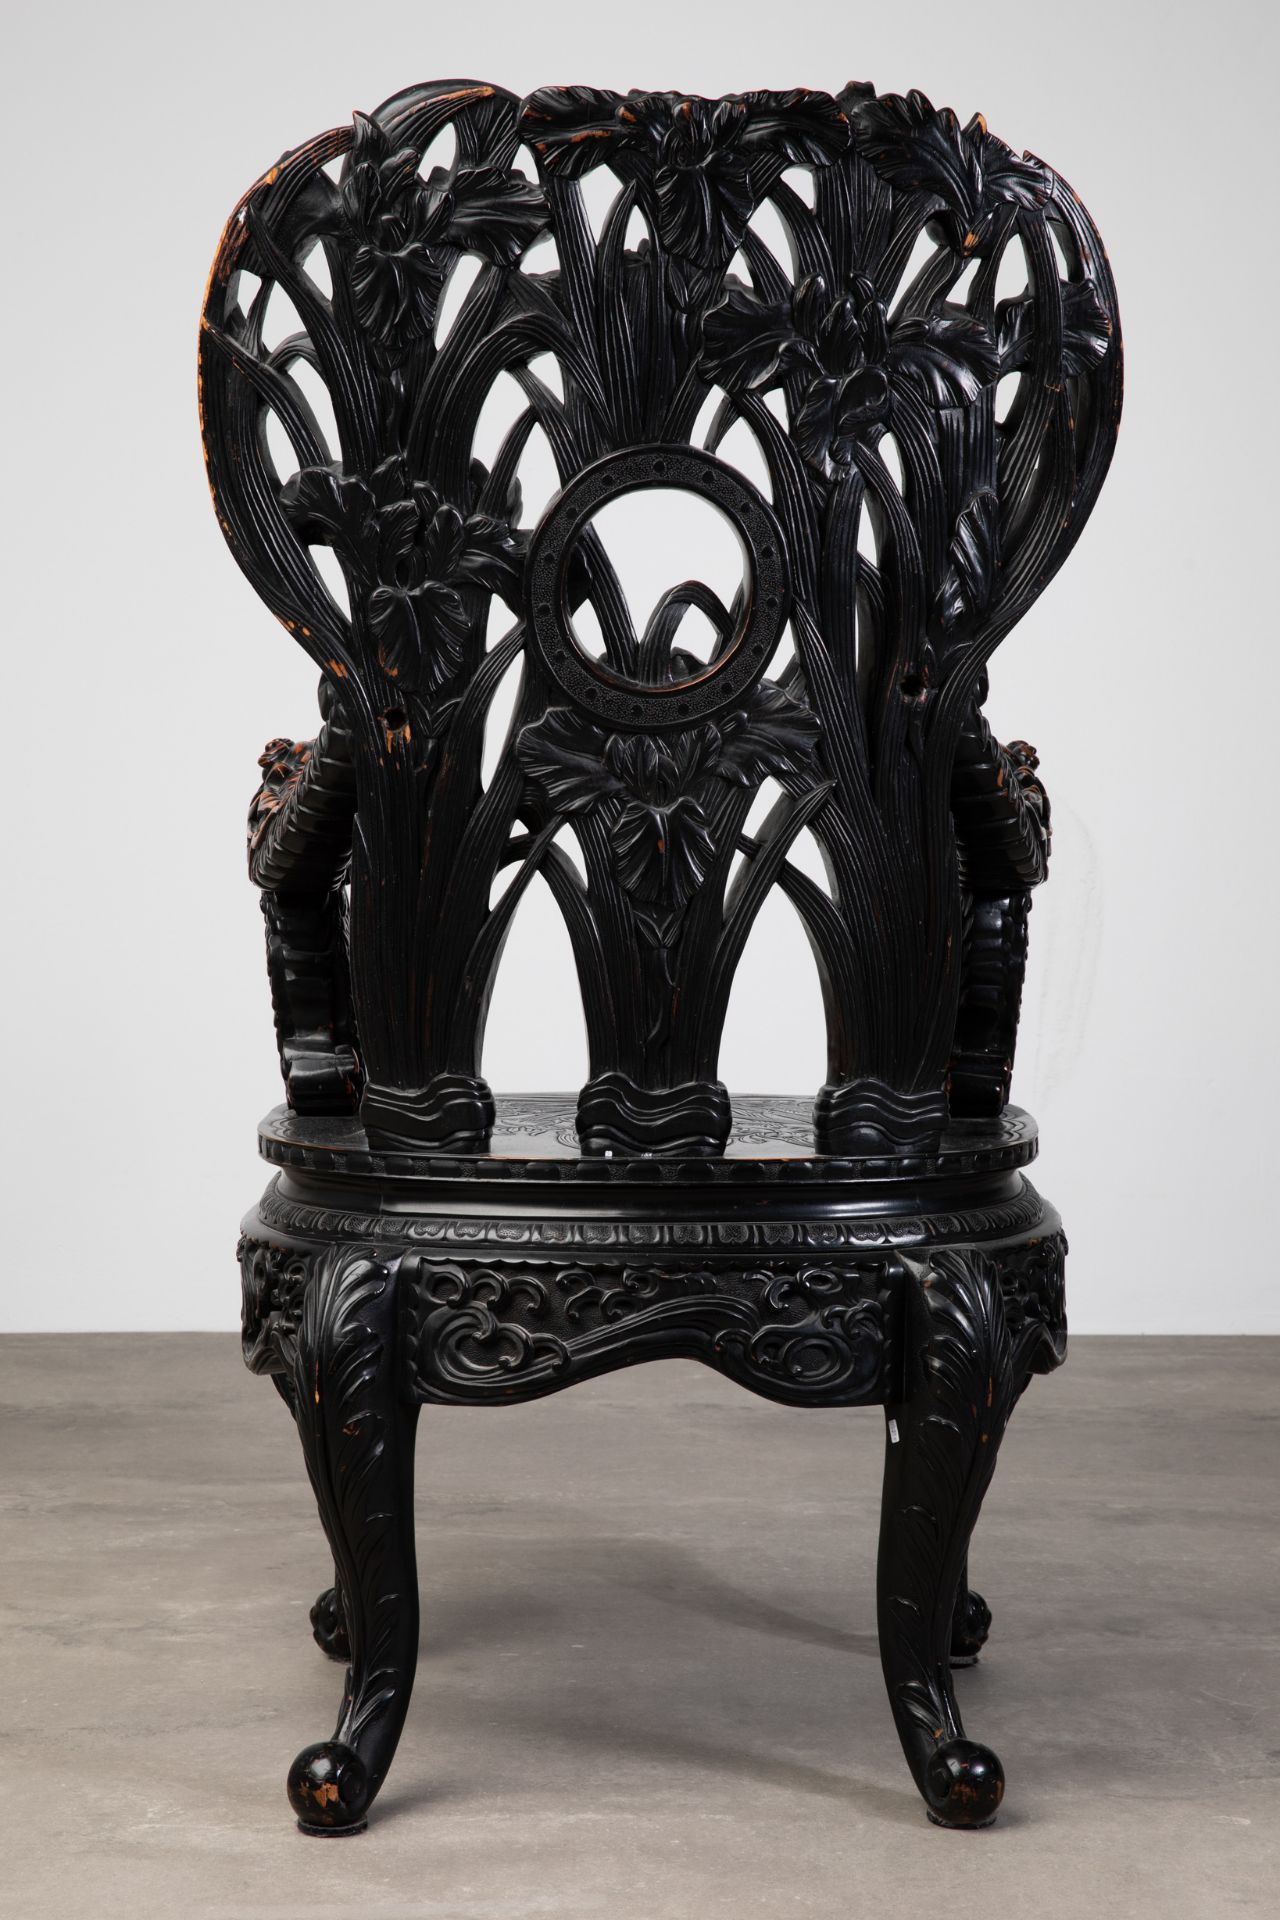 Large Carved Armchair with dragons and lilies, China - Image 4 of 4